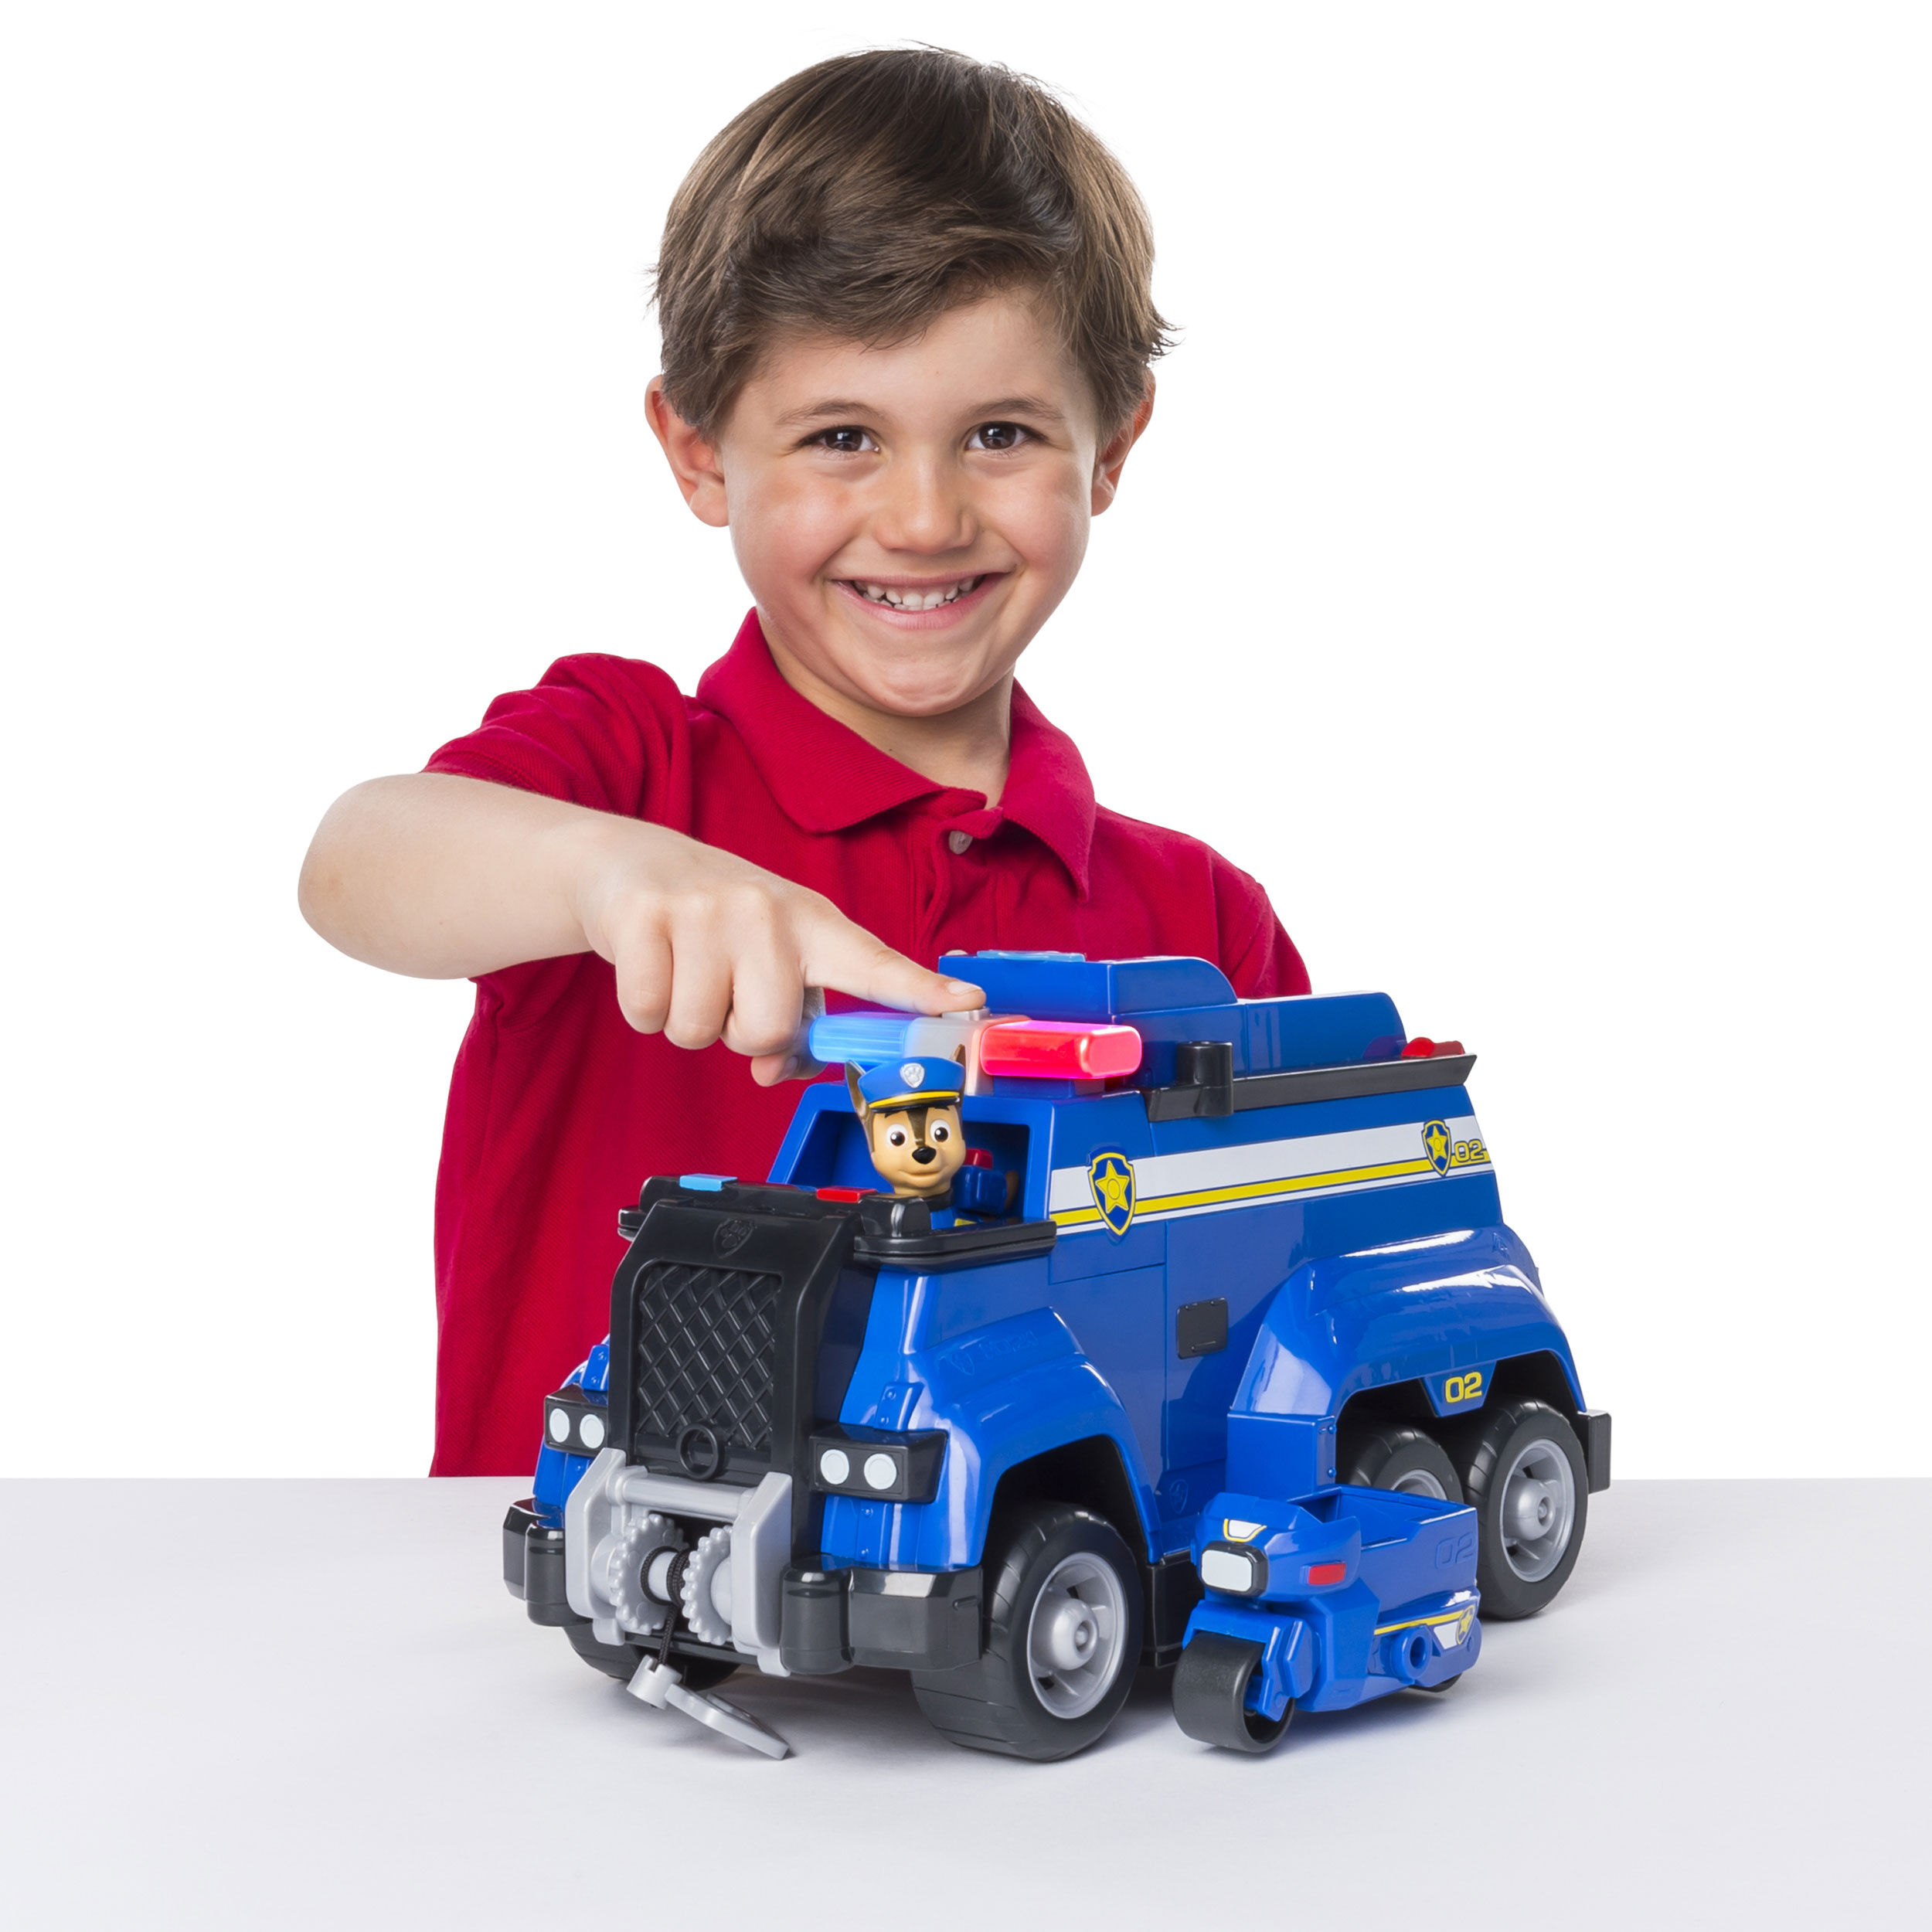 paw patrol chase ultimate police rescue cruiser